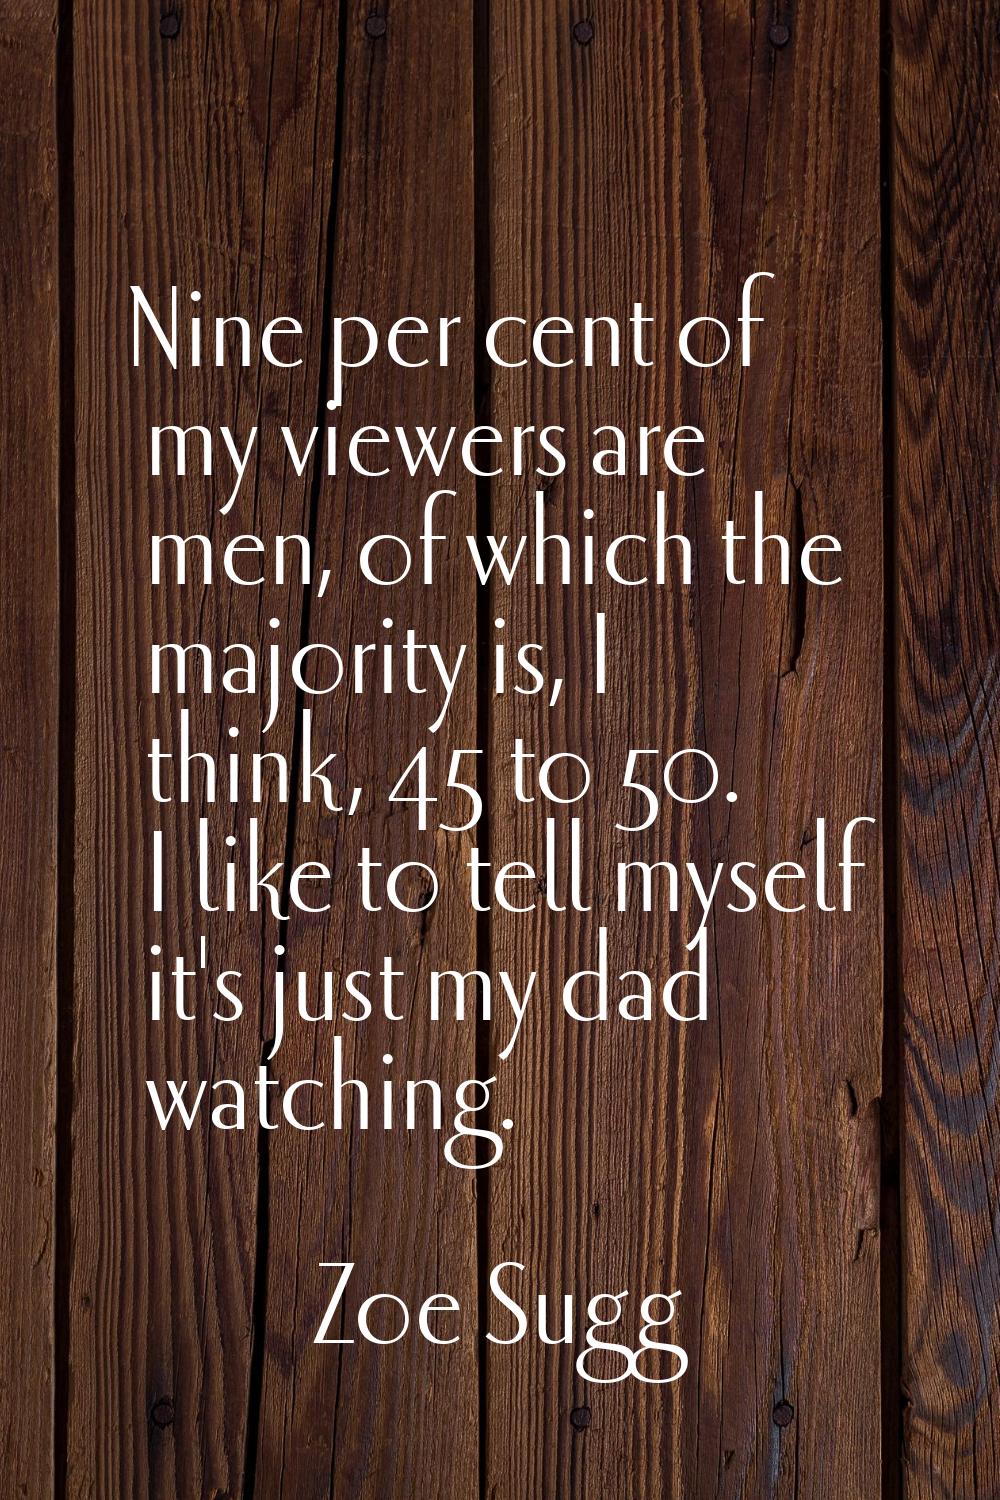 Nine per cent of my viewers are men, of which the majority is, I think, 45 to 50. I like to tell my